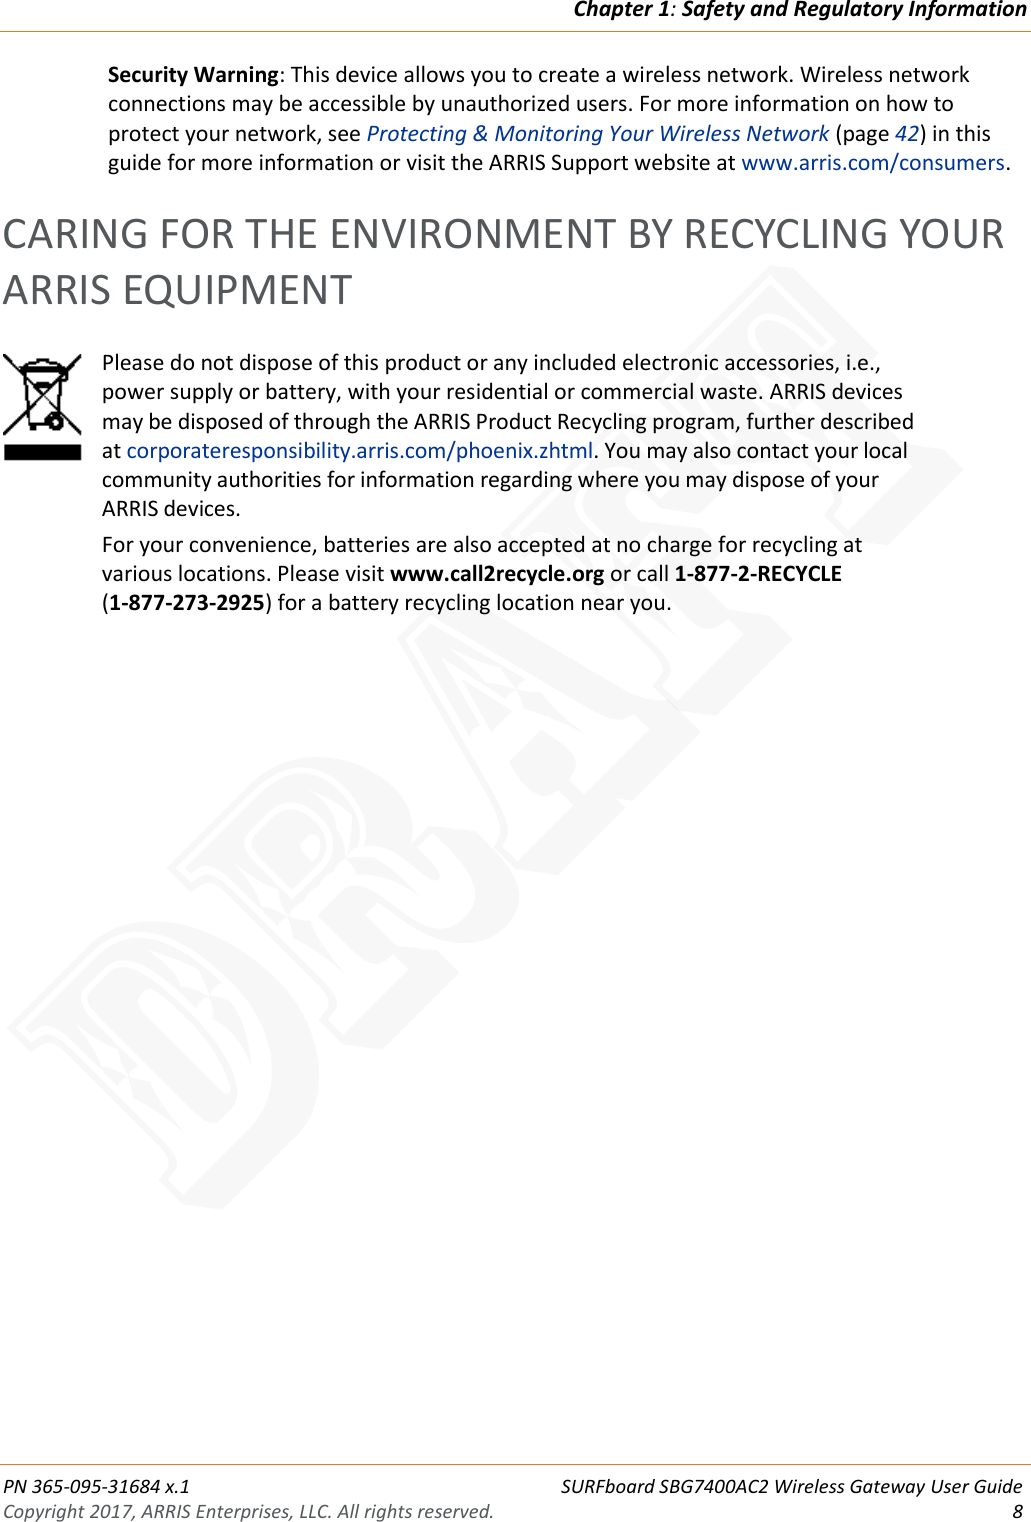 Chapter 1: Safety and Regulatory Information  PN 365-095-31684 x.1 SURFboard SBG7400AC2 Wireless Gateway User Guide Copyright 2017, ARRIS Enterprises, LLC. All rights reserved.  8  Security Warning: This device allows you to create a wireless network. Wireless network connections may be accessible by unauthorized users. For more information on how to protect your network, see Protecting &amp; Monitoring Your Wireless Network (page 42) in this guide for more information or visit the ARRIS Support website at www.arris.com/consumers.   CARING FOR THE ENVIRONMENT BY RECYCLING YOUR ARRIS EQUIPMENT  Please do not dispose of this product or any included electronic accessories, i.e., power supply or battery, with your residential or commercial waste. ARRIS devices may be disposed of through the ARRIS Product Recycling program, further described at corporateresponsibility.arris.com/phoenix.zhtml. You may also contact your local community authorities for information regarding where you may dispose of your ARRIS devices. For your convenience, batteries are also accepted at no charge for recycling at various locations. Please visit www.call2recycle.org or call 1-877-2-RECYCLE  (1-877-273-2925) for a battery recycling location near you.  DRAFT